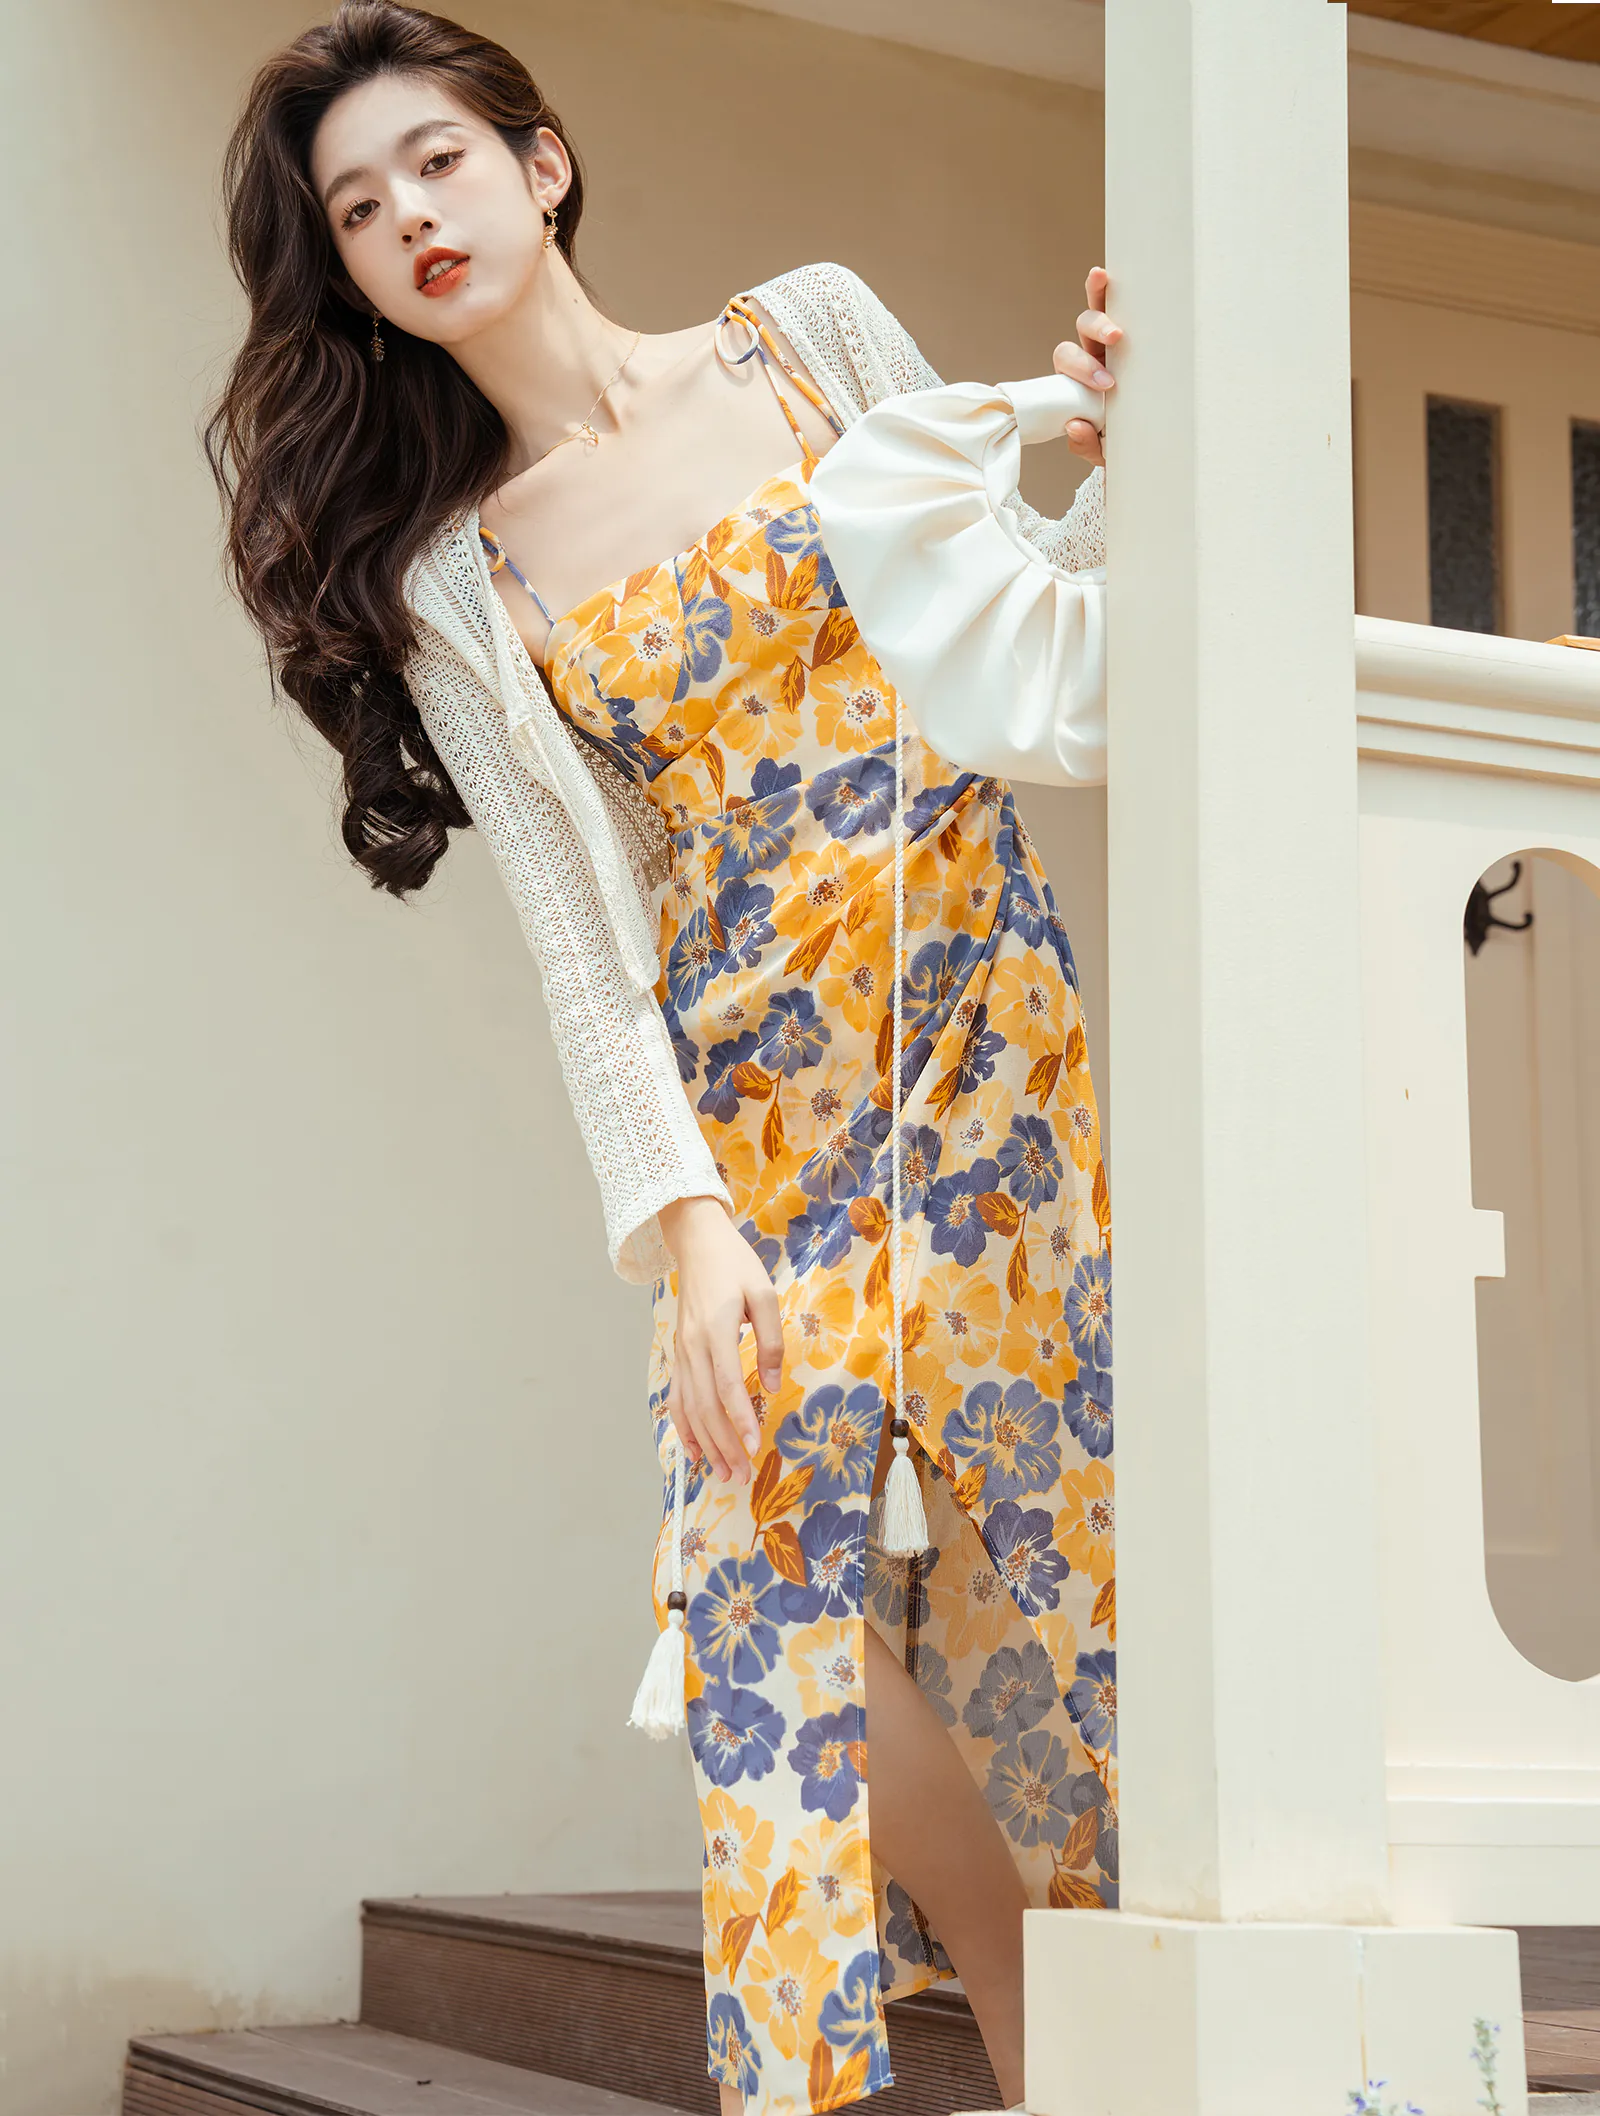 Sweet Floral Printed Yellow Summer Beach Slip Dress with Knit Cardigan02